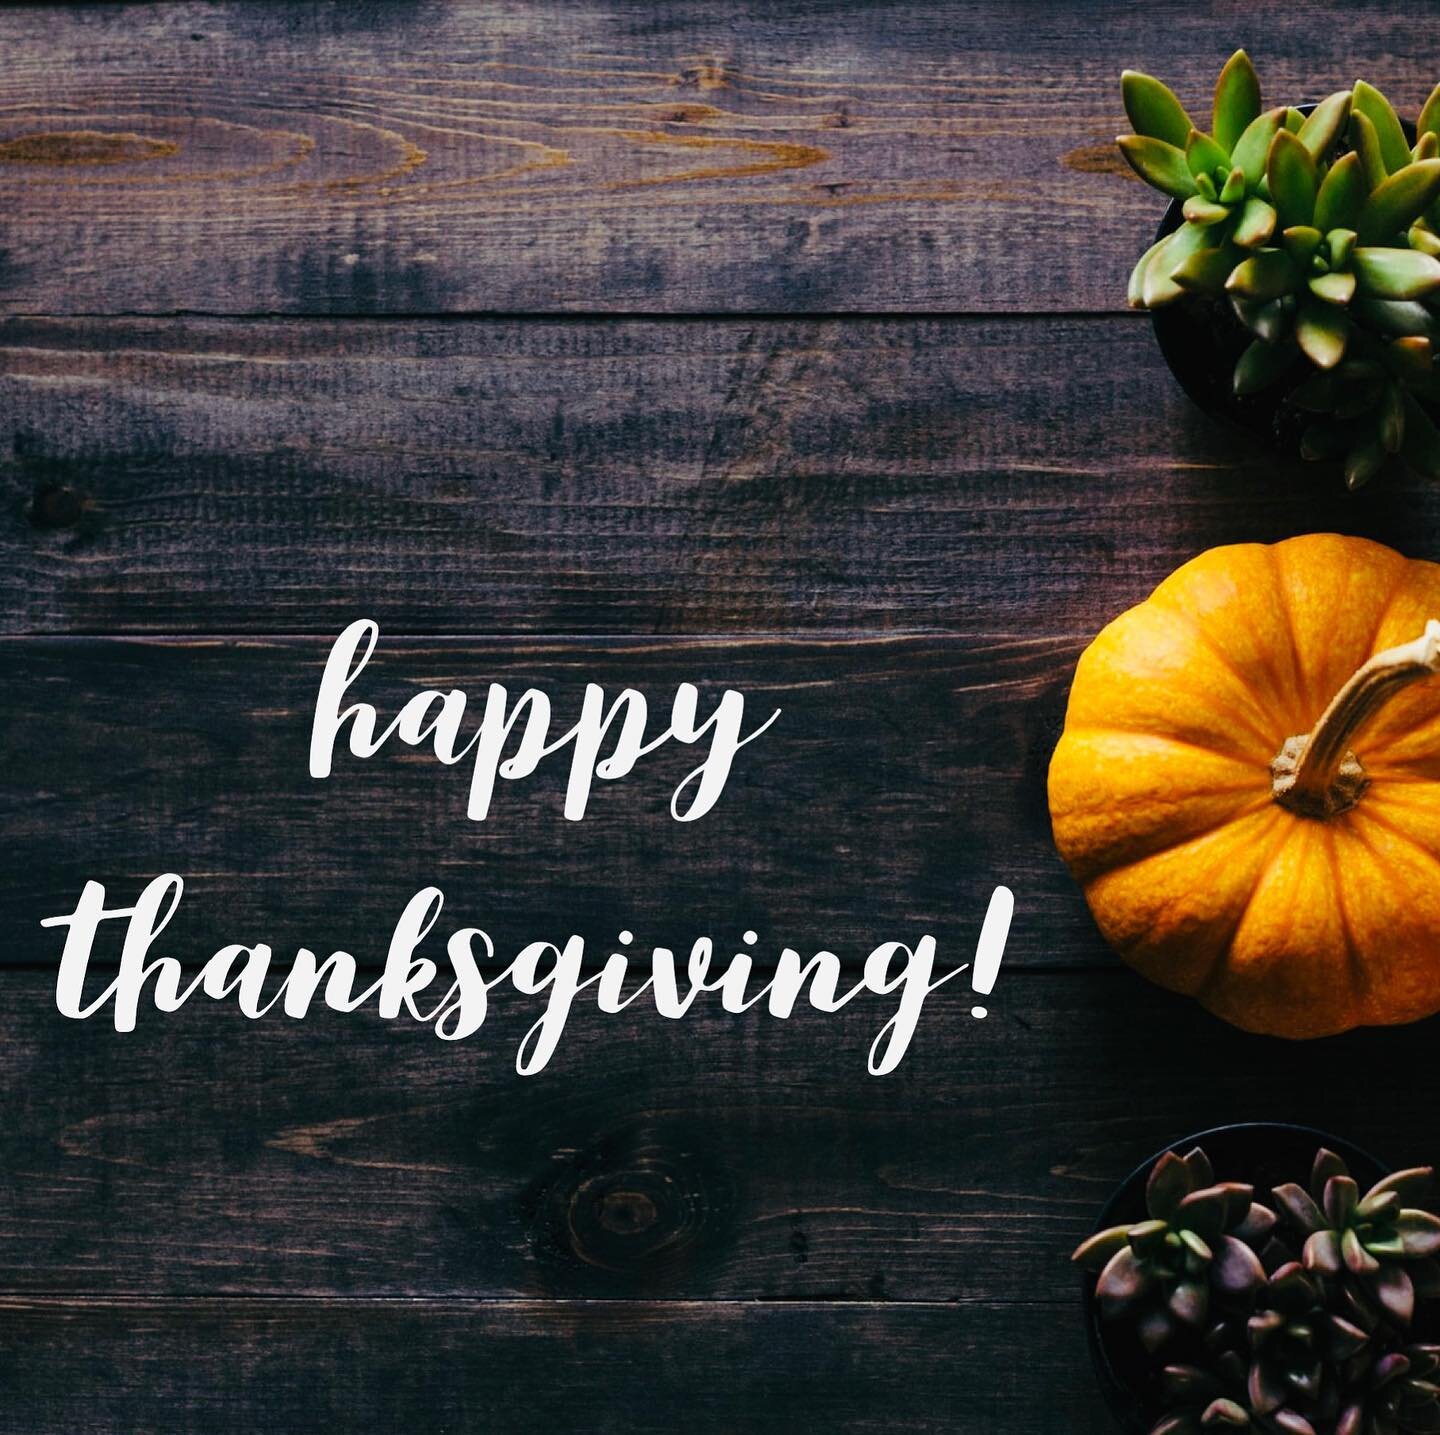 Happy Thanksgiving from The Loft Salon! Hope everyone has a safe and relaxing day! 
.
.
.
.
#happythanksgivng